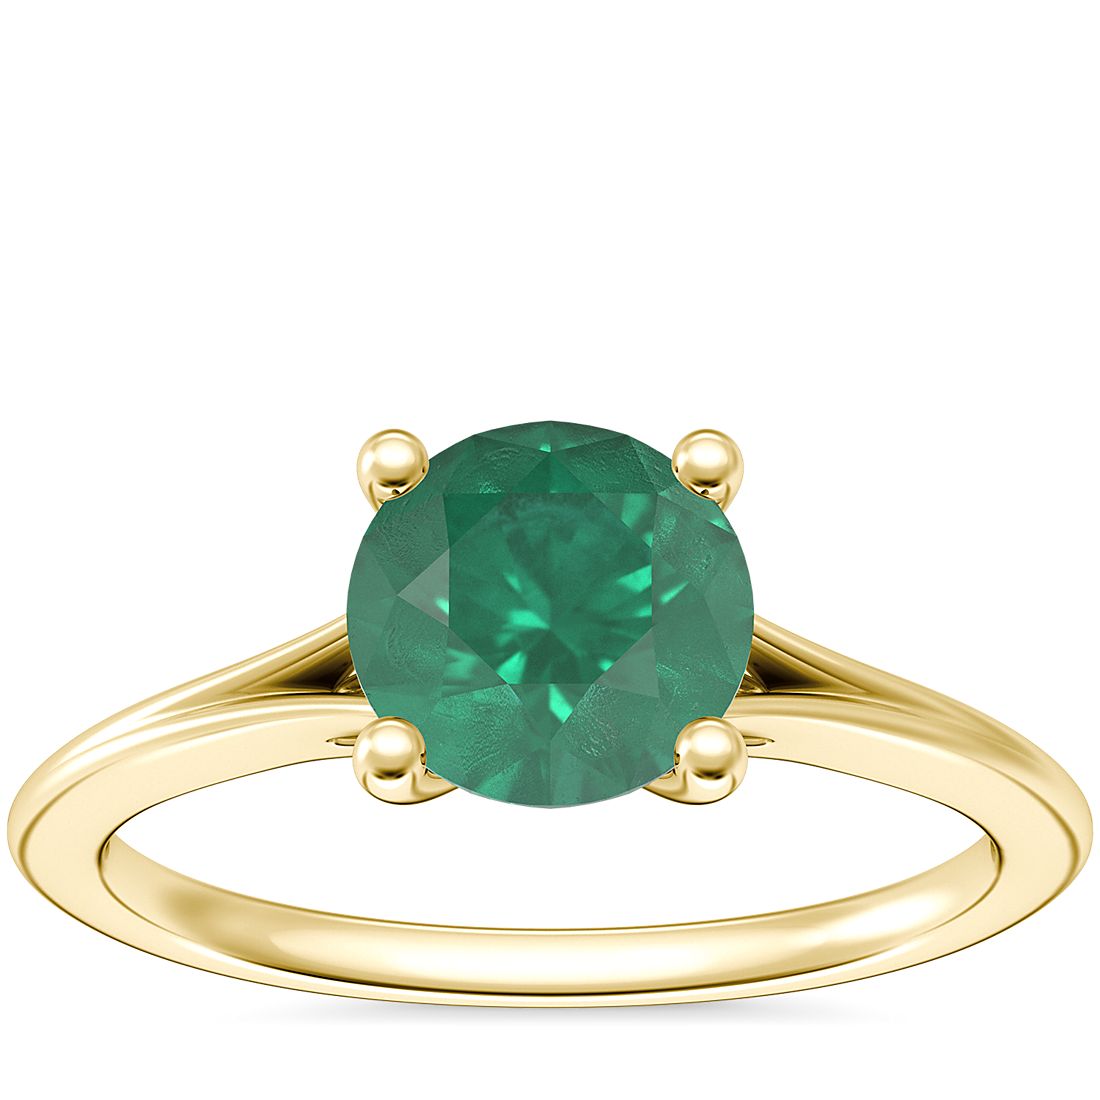 Petite Split Shank Solitaire Engagement Ring with Round Emerald in 18k Yellow Gold (6.5mm)